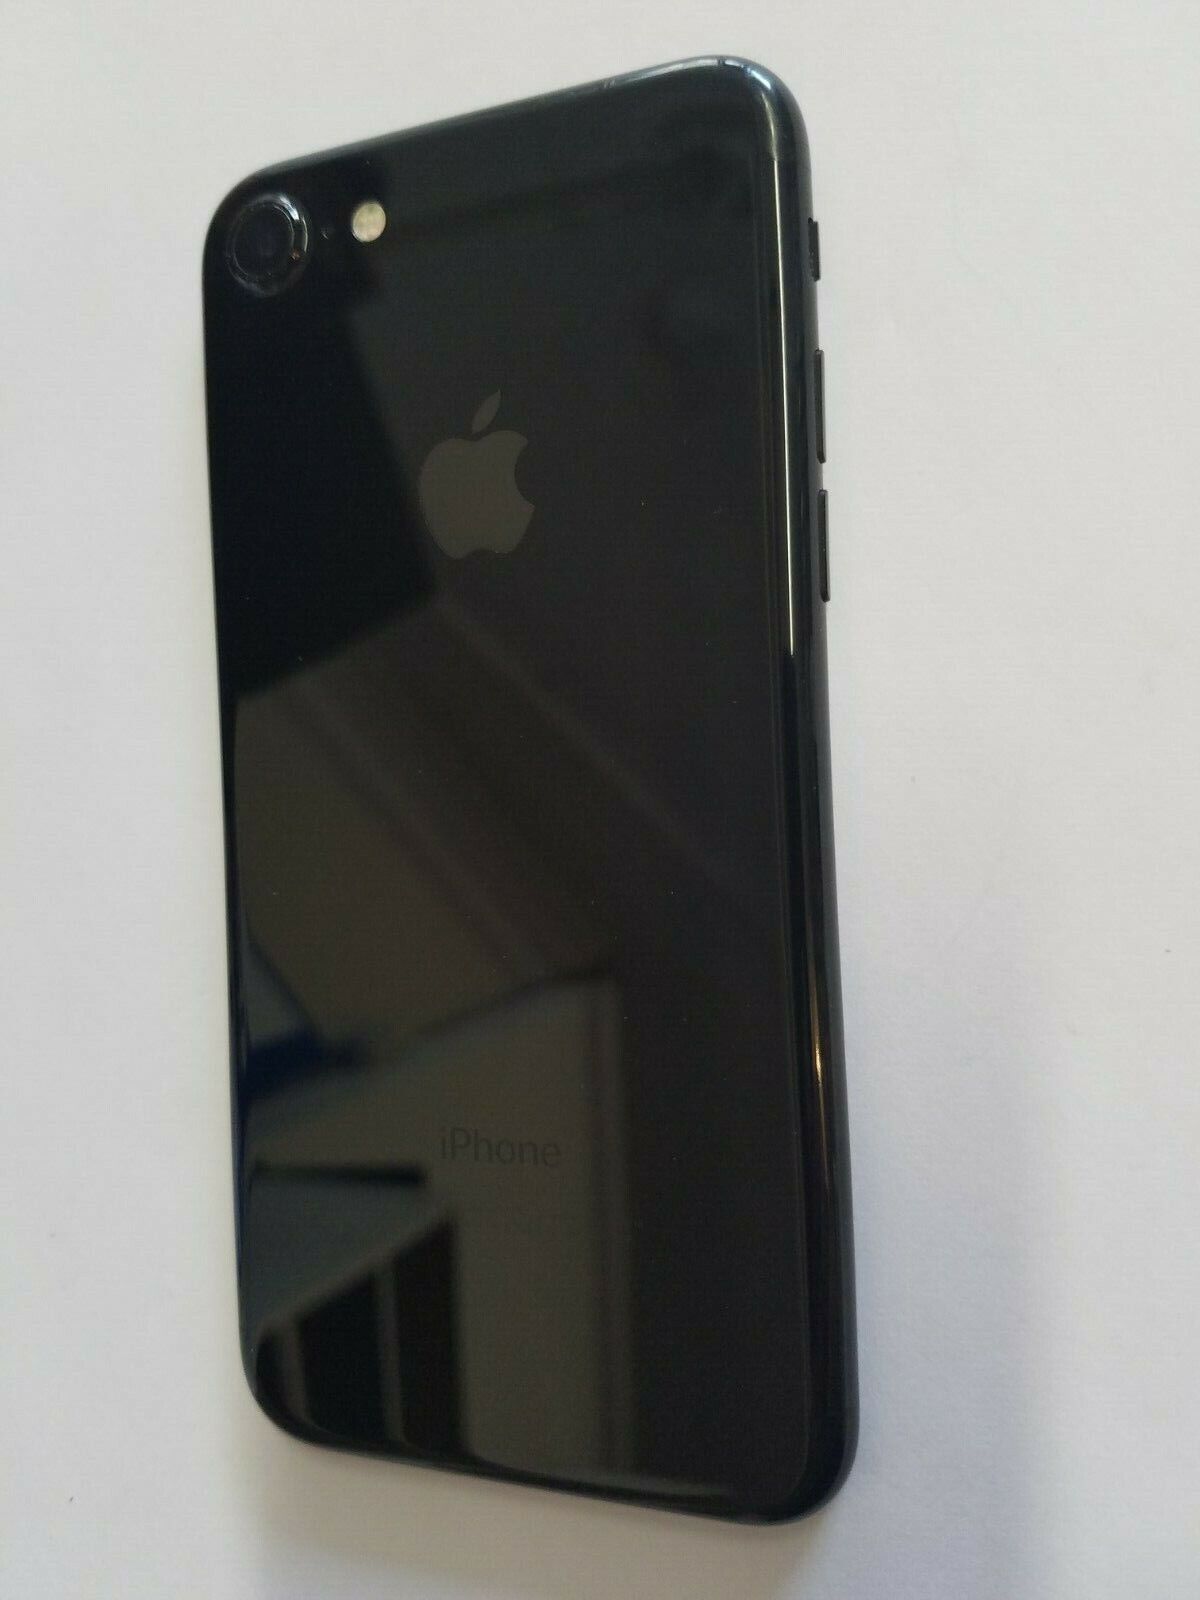 Genuine Iphone 7 Black Glossy Main Frame Replacement Housing iPhone7 A1778